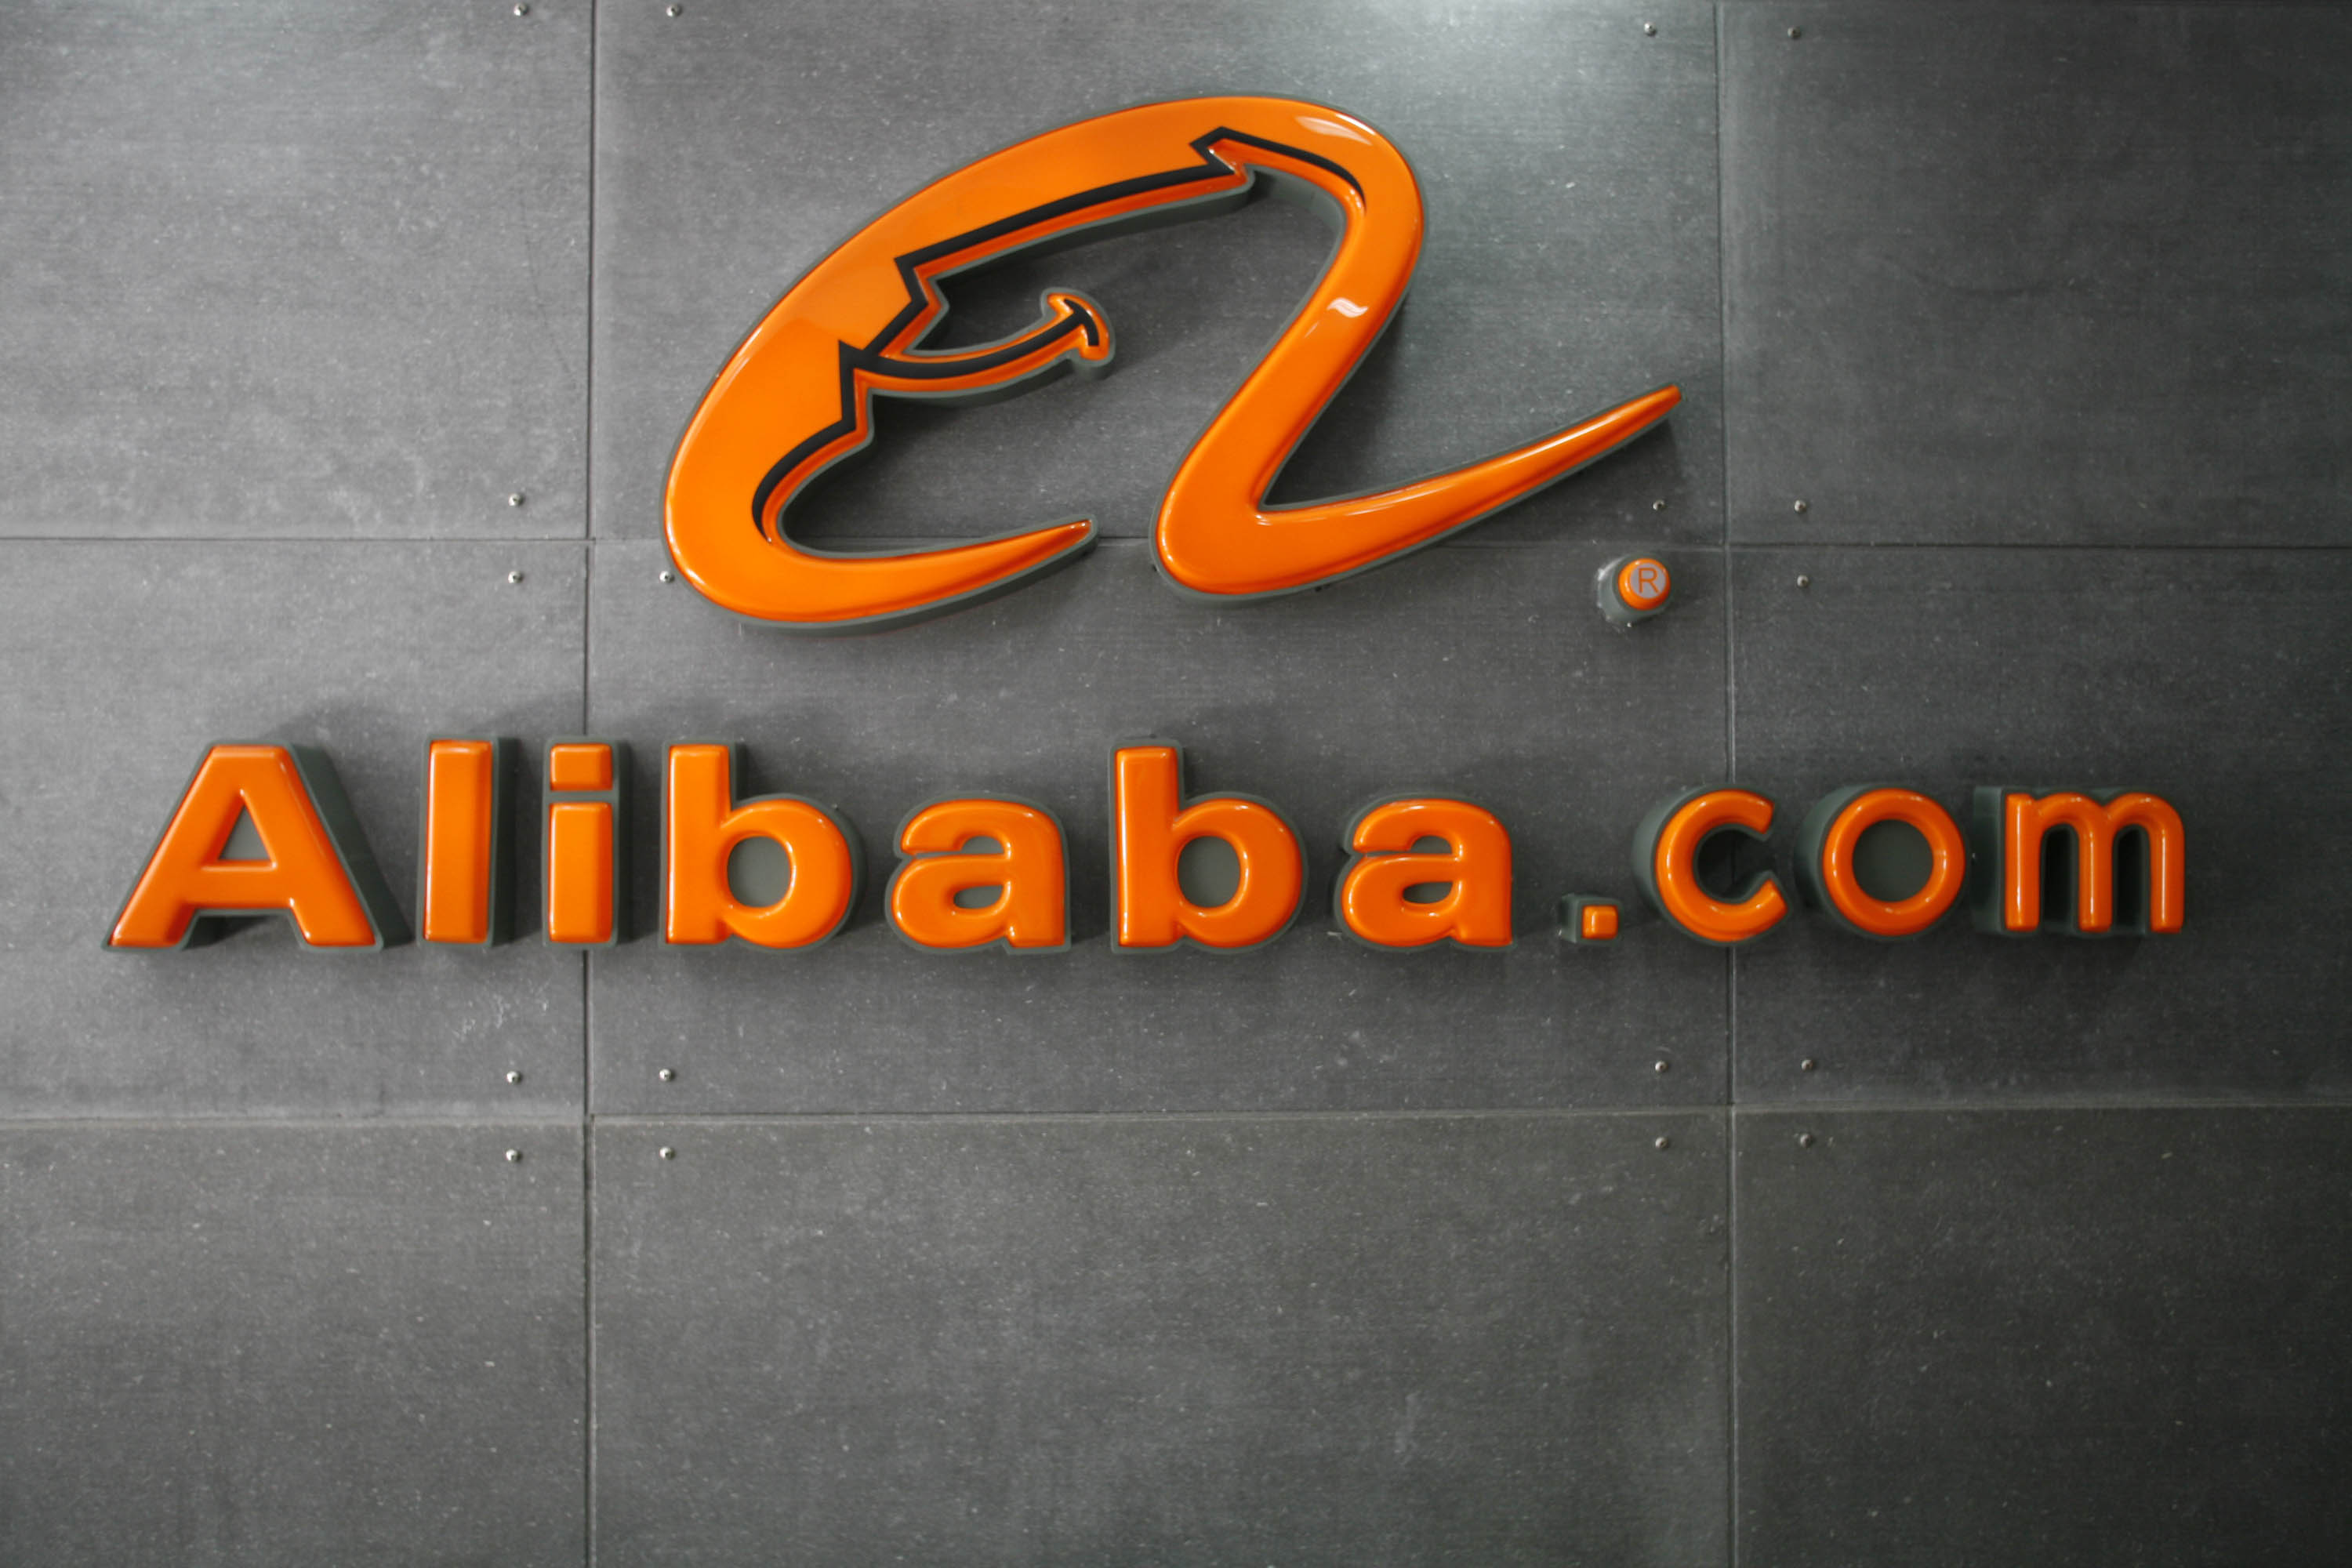 A logo hangs on the wall at the Alibaba.com head office in Hangzhou, China. (Bloomberg via Getty Images)